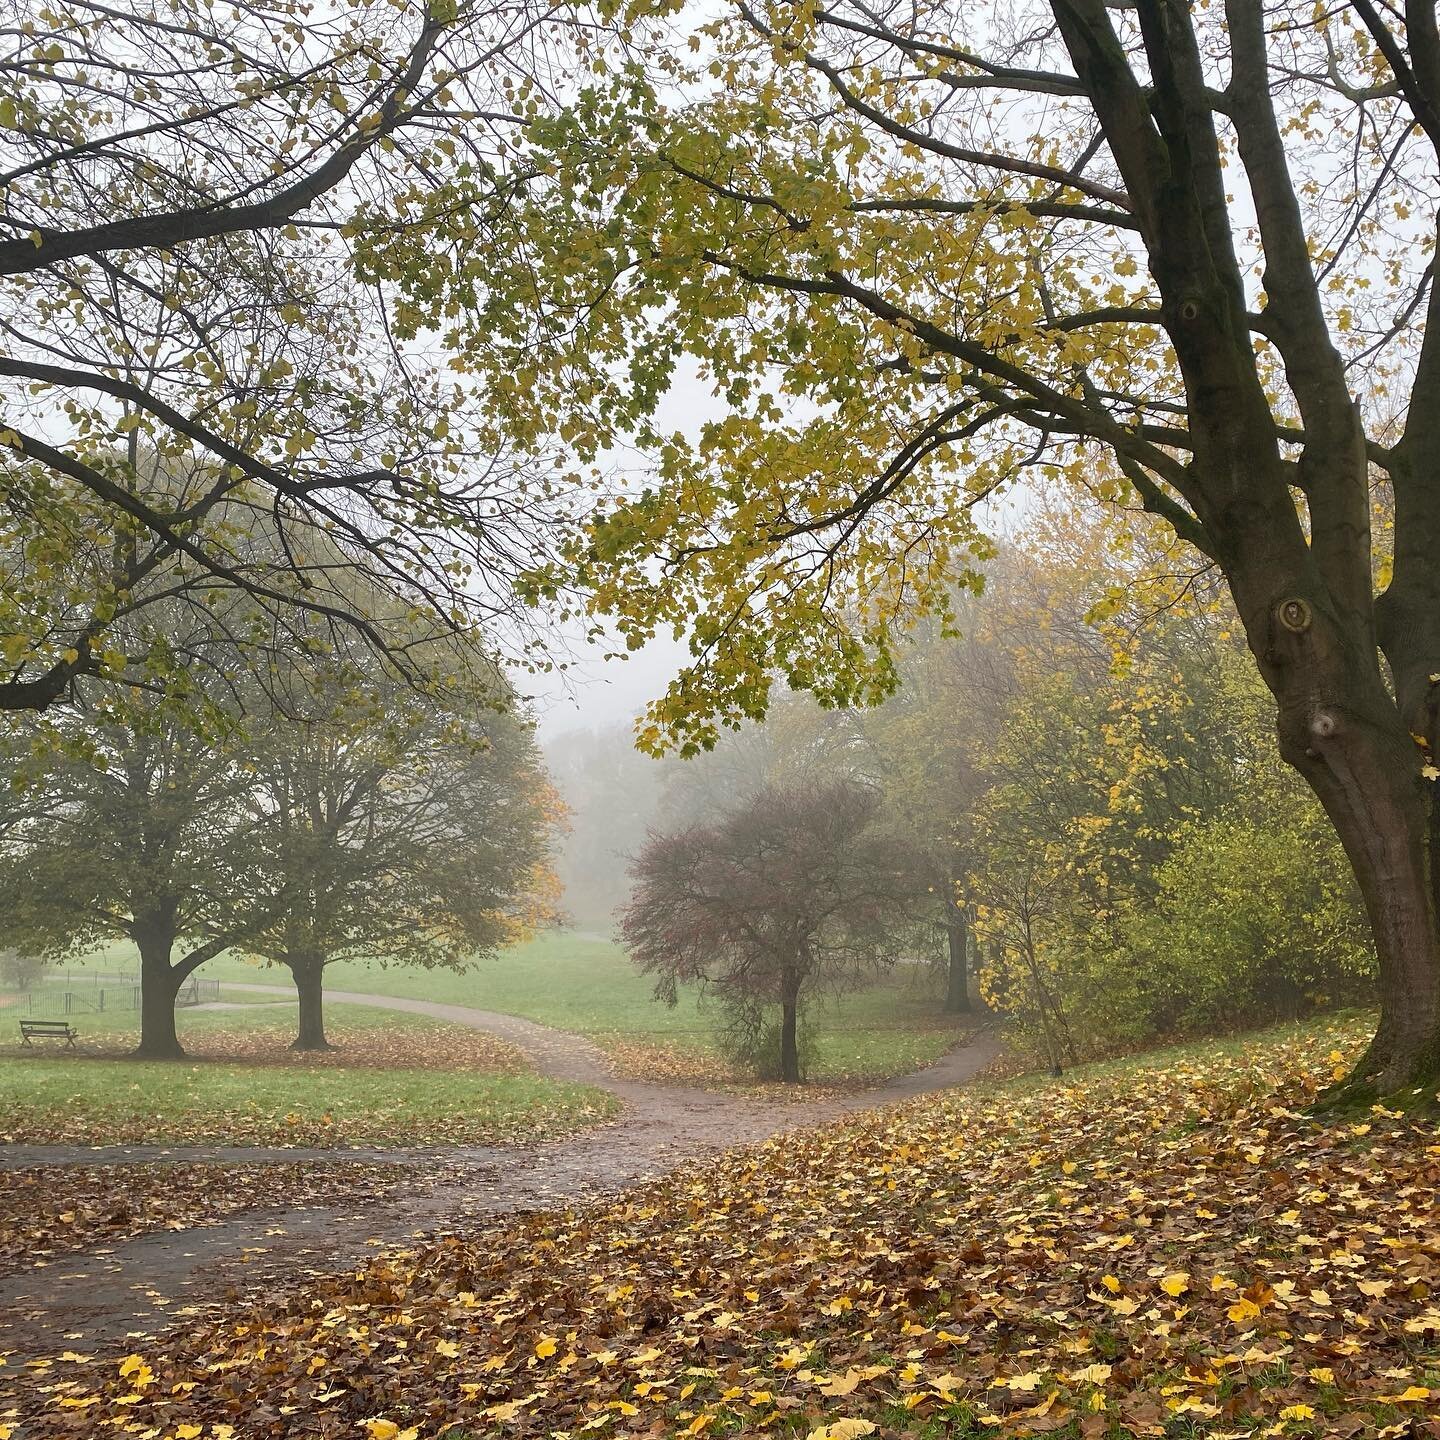 Autumn shifts steadily into winter&hellip;The many colours of autumn leaves are still going strong in our local park, water droplets cling to pine needles, berries glisten, and damp leaves decorate the paths and create bright carpets. 

A third day o